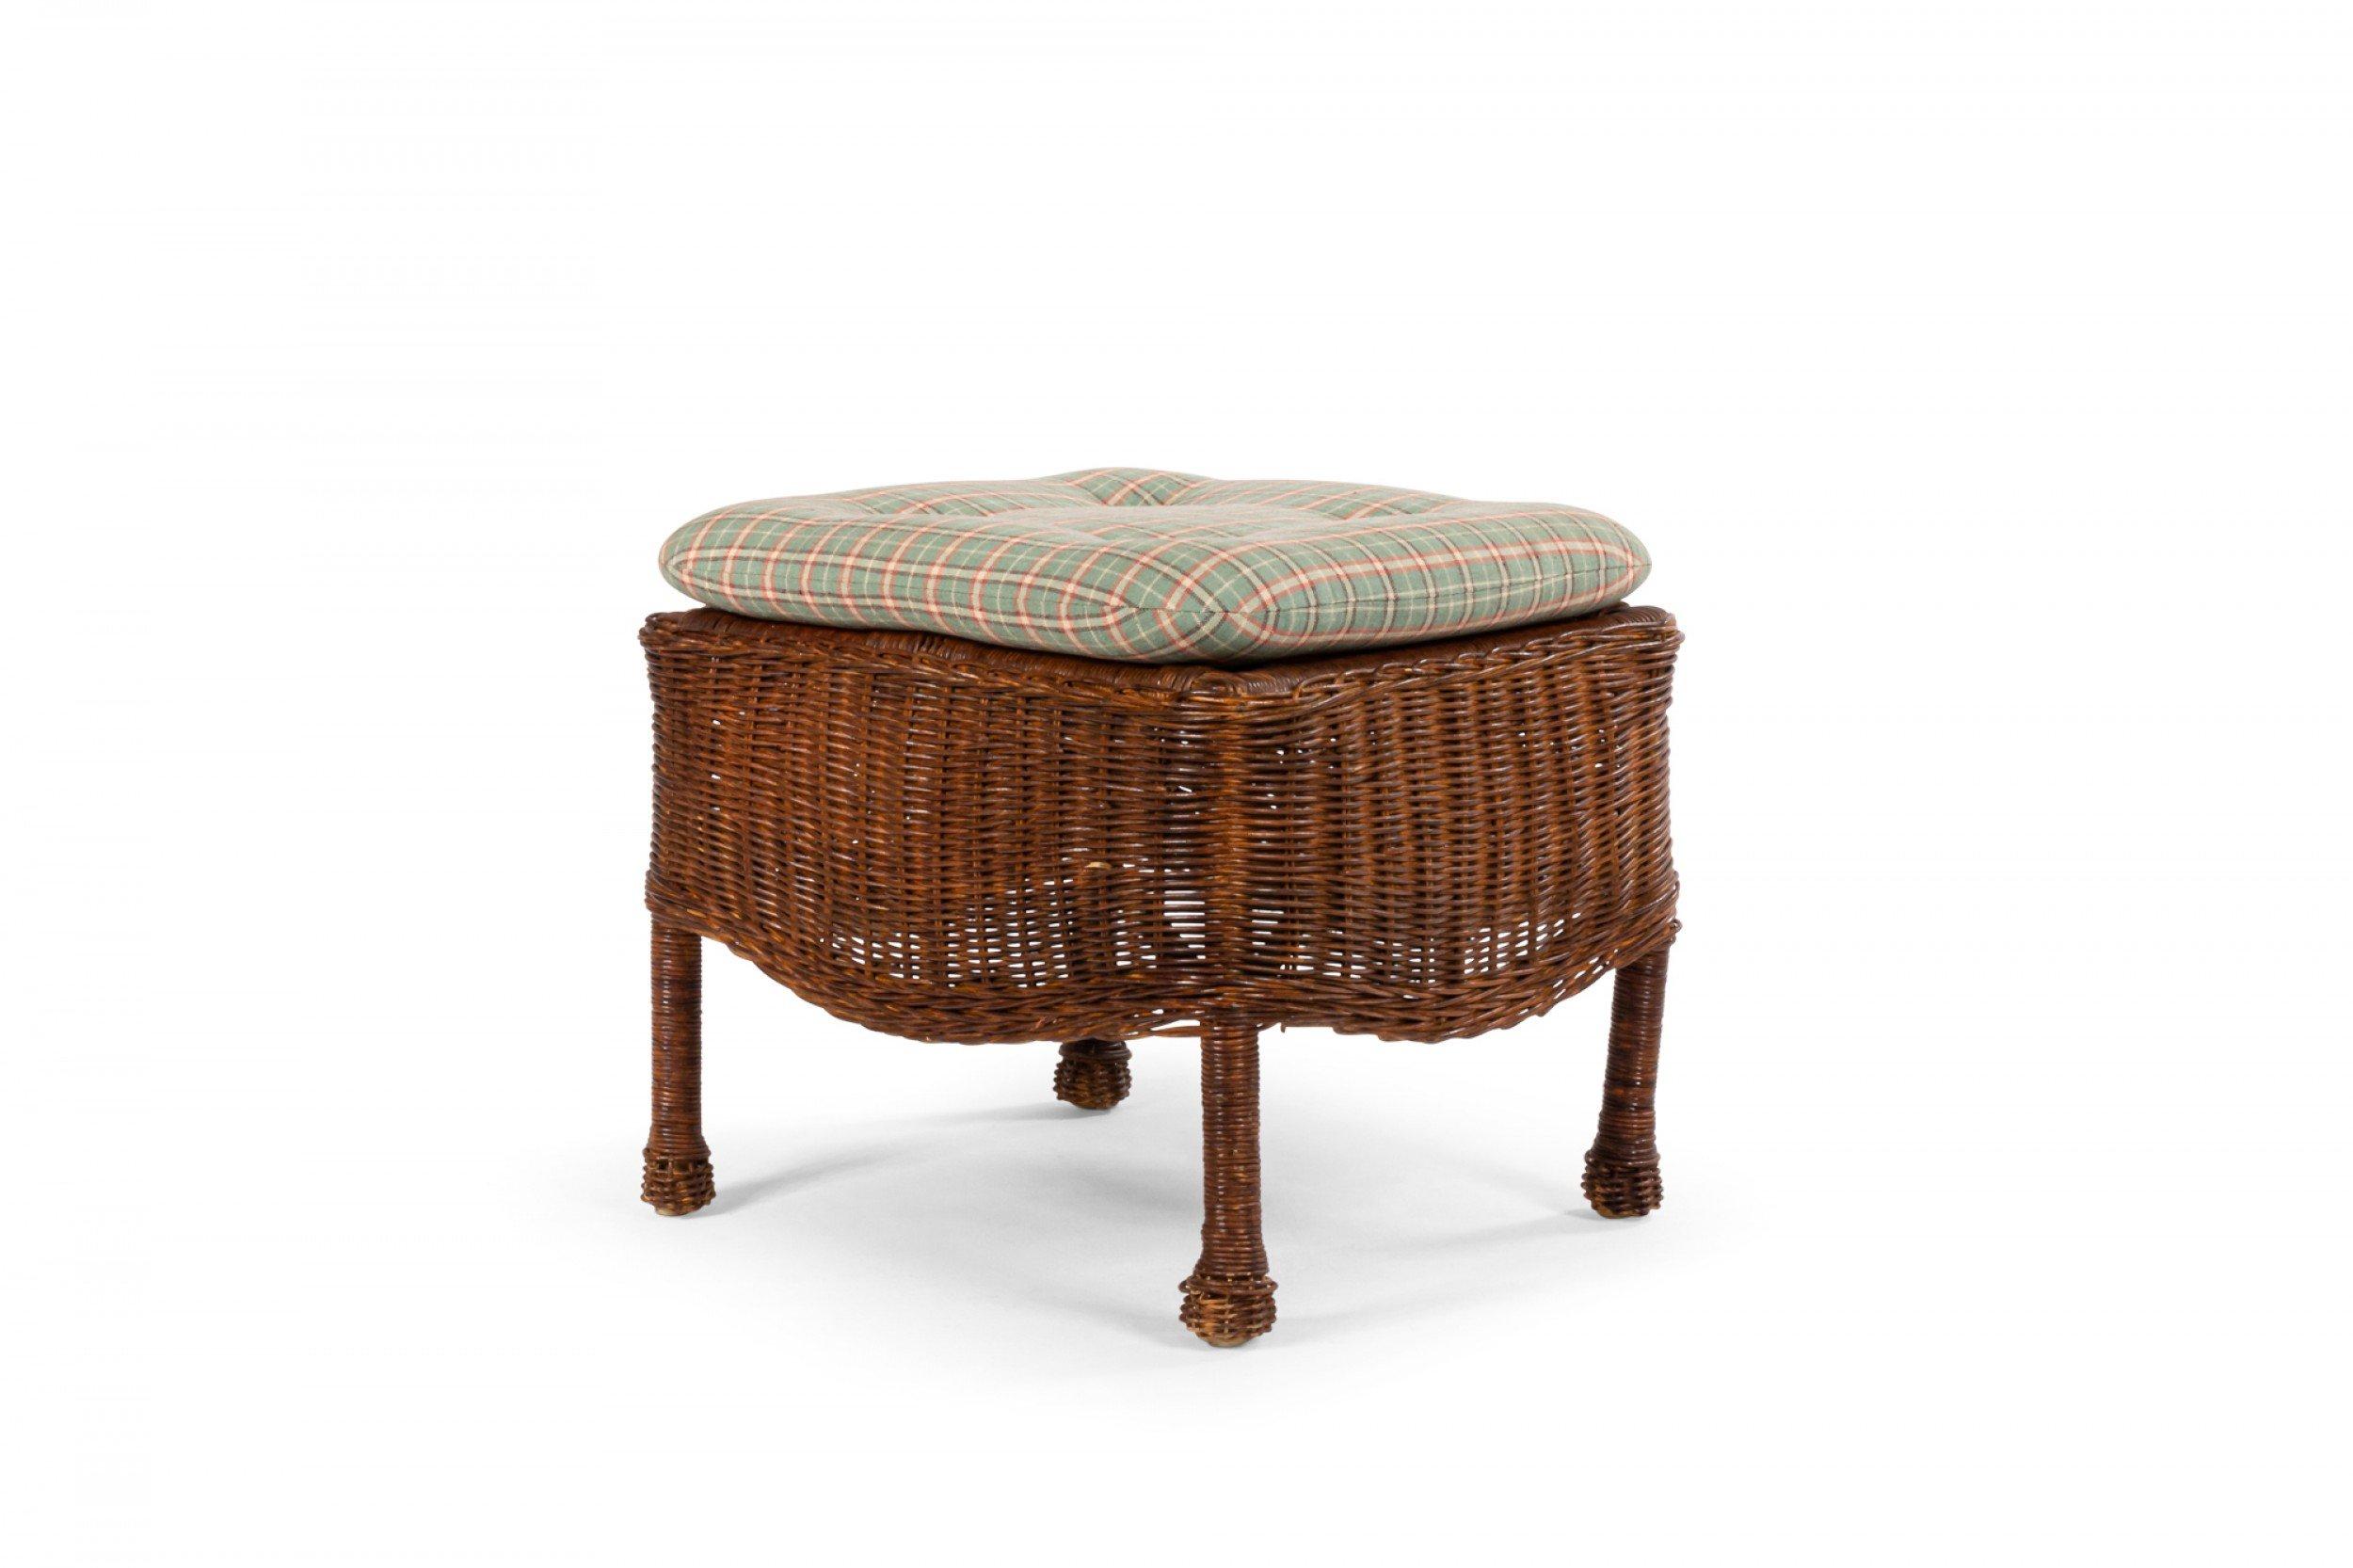 American Mission style natural wicker rectangular ottoman with an upholstered seat cushion.
   